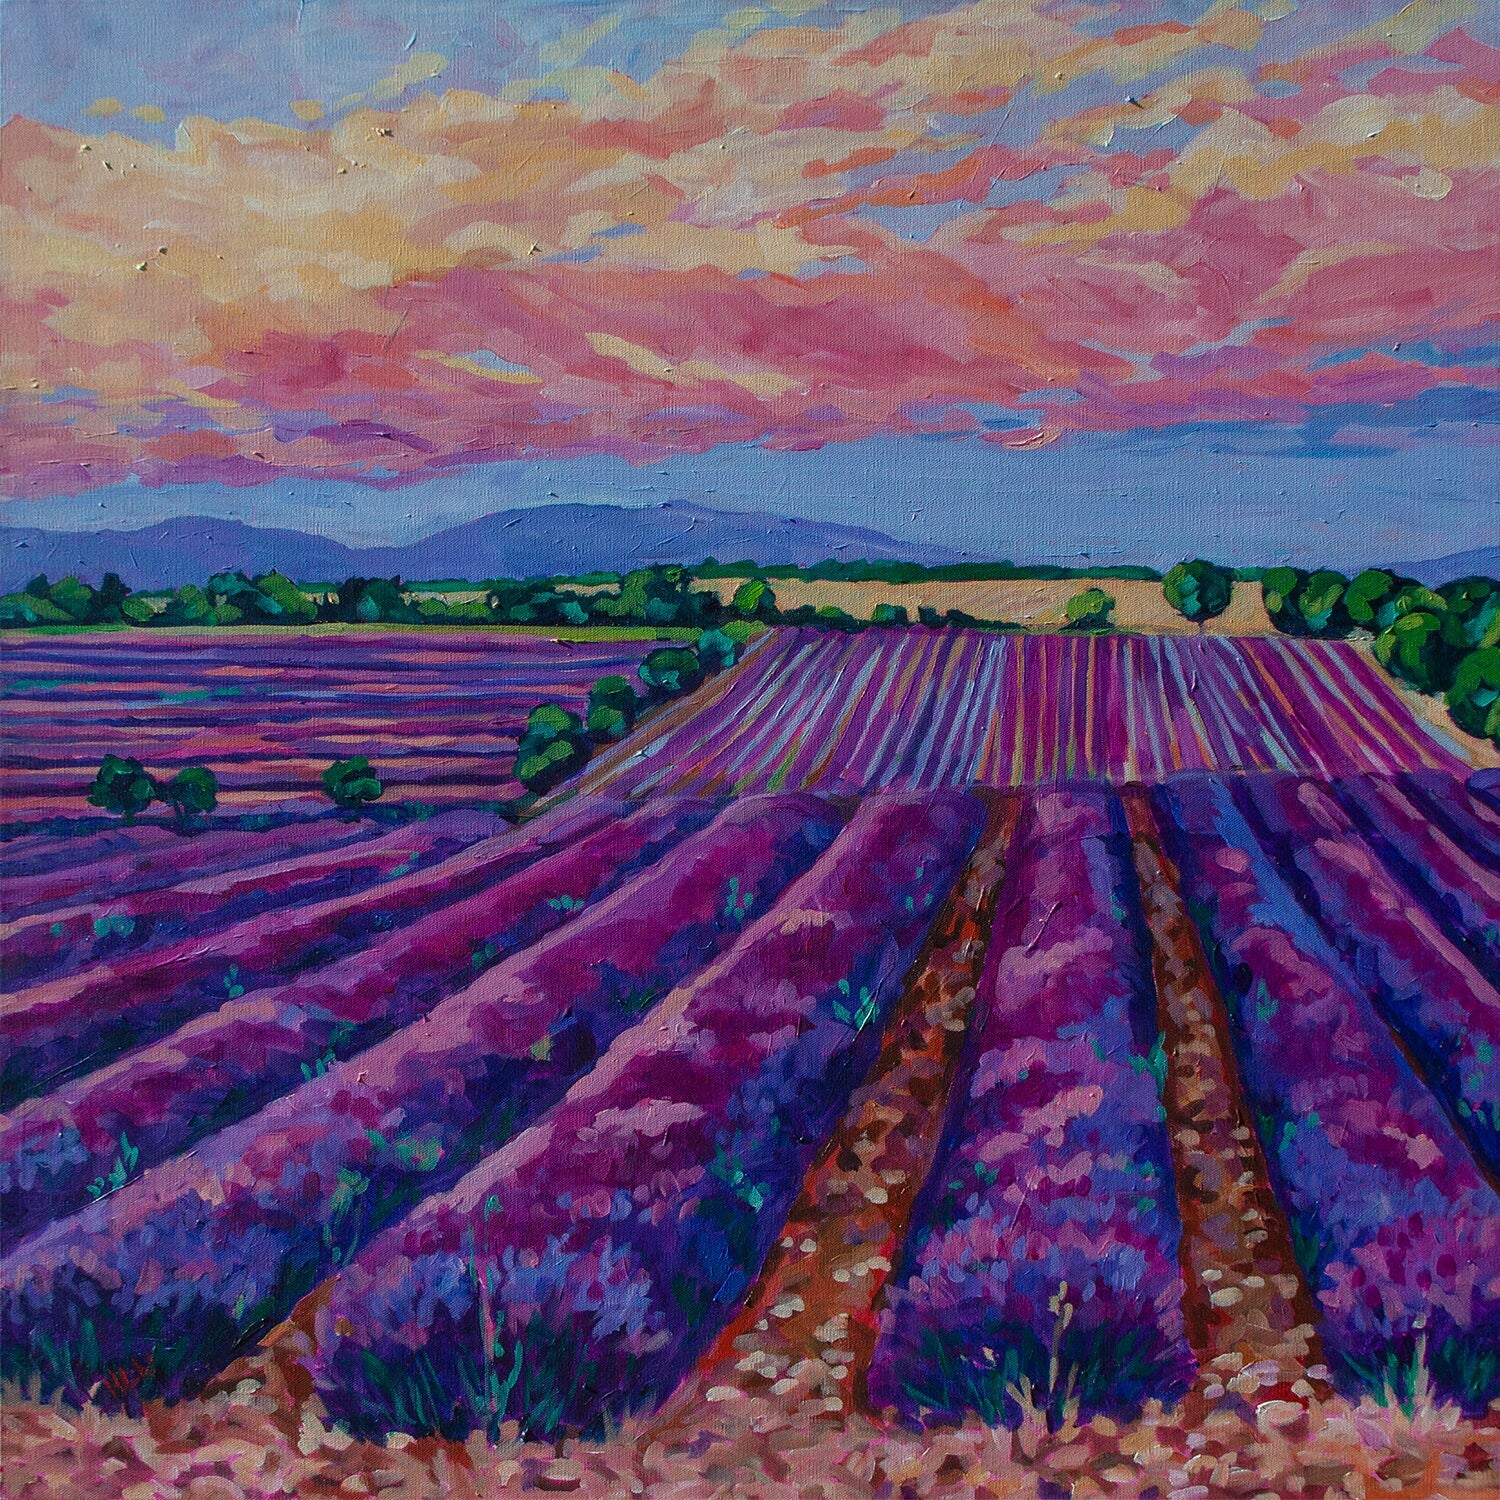 Original vibrant  impressionistic painting of the lavender fields near Madrid Spain at sunset